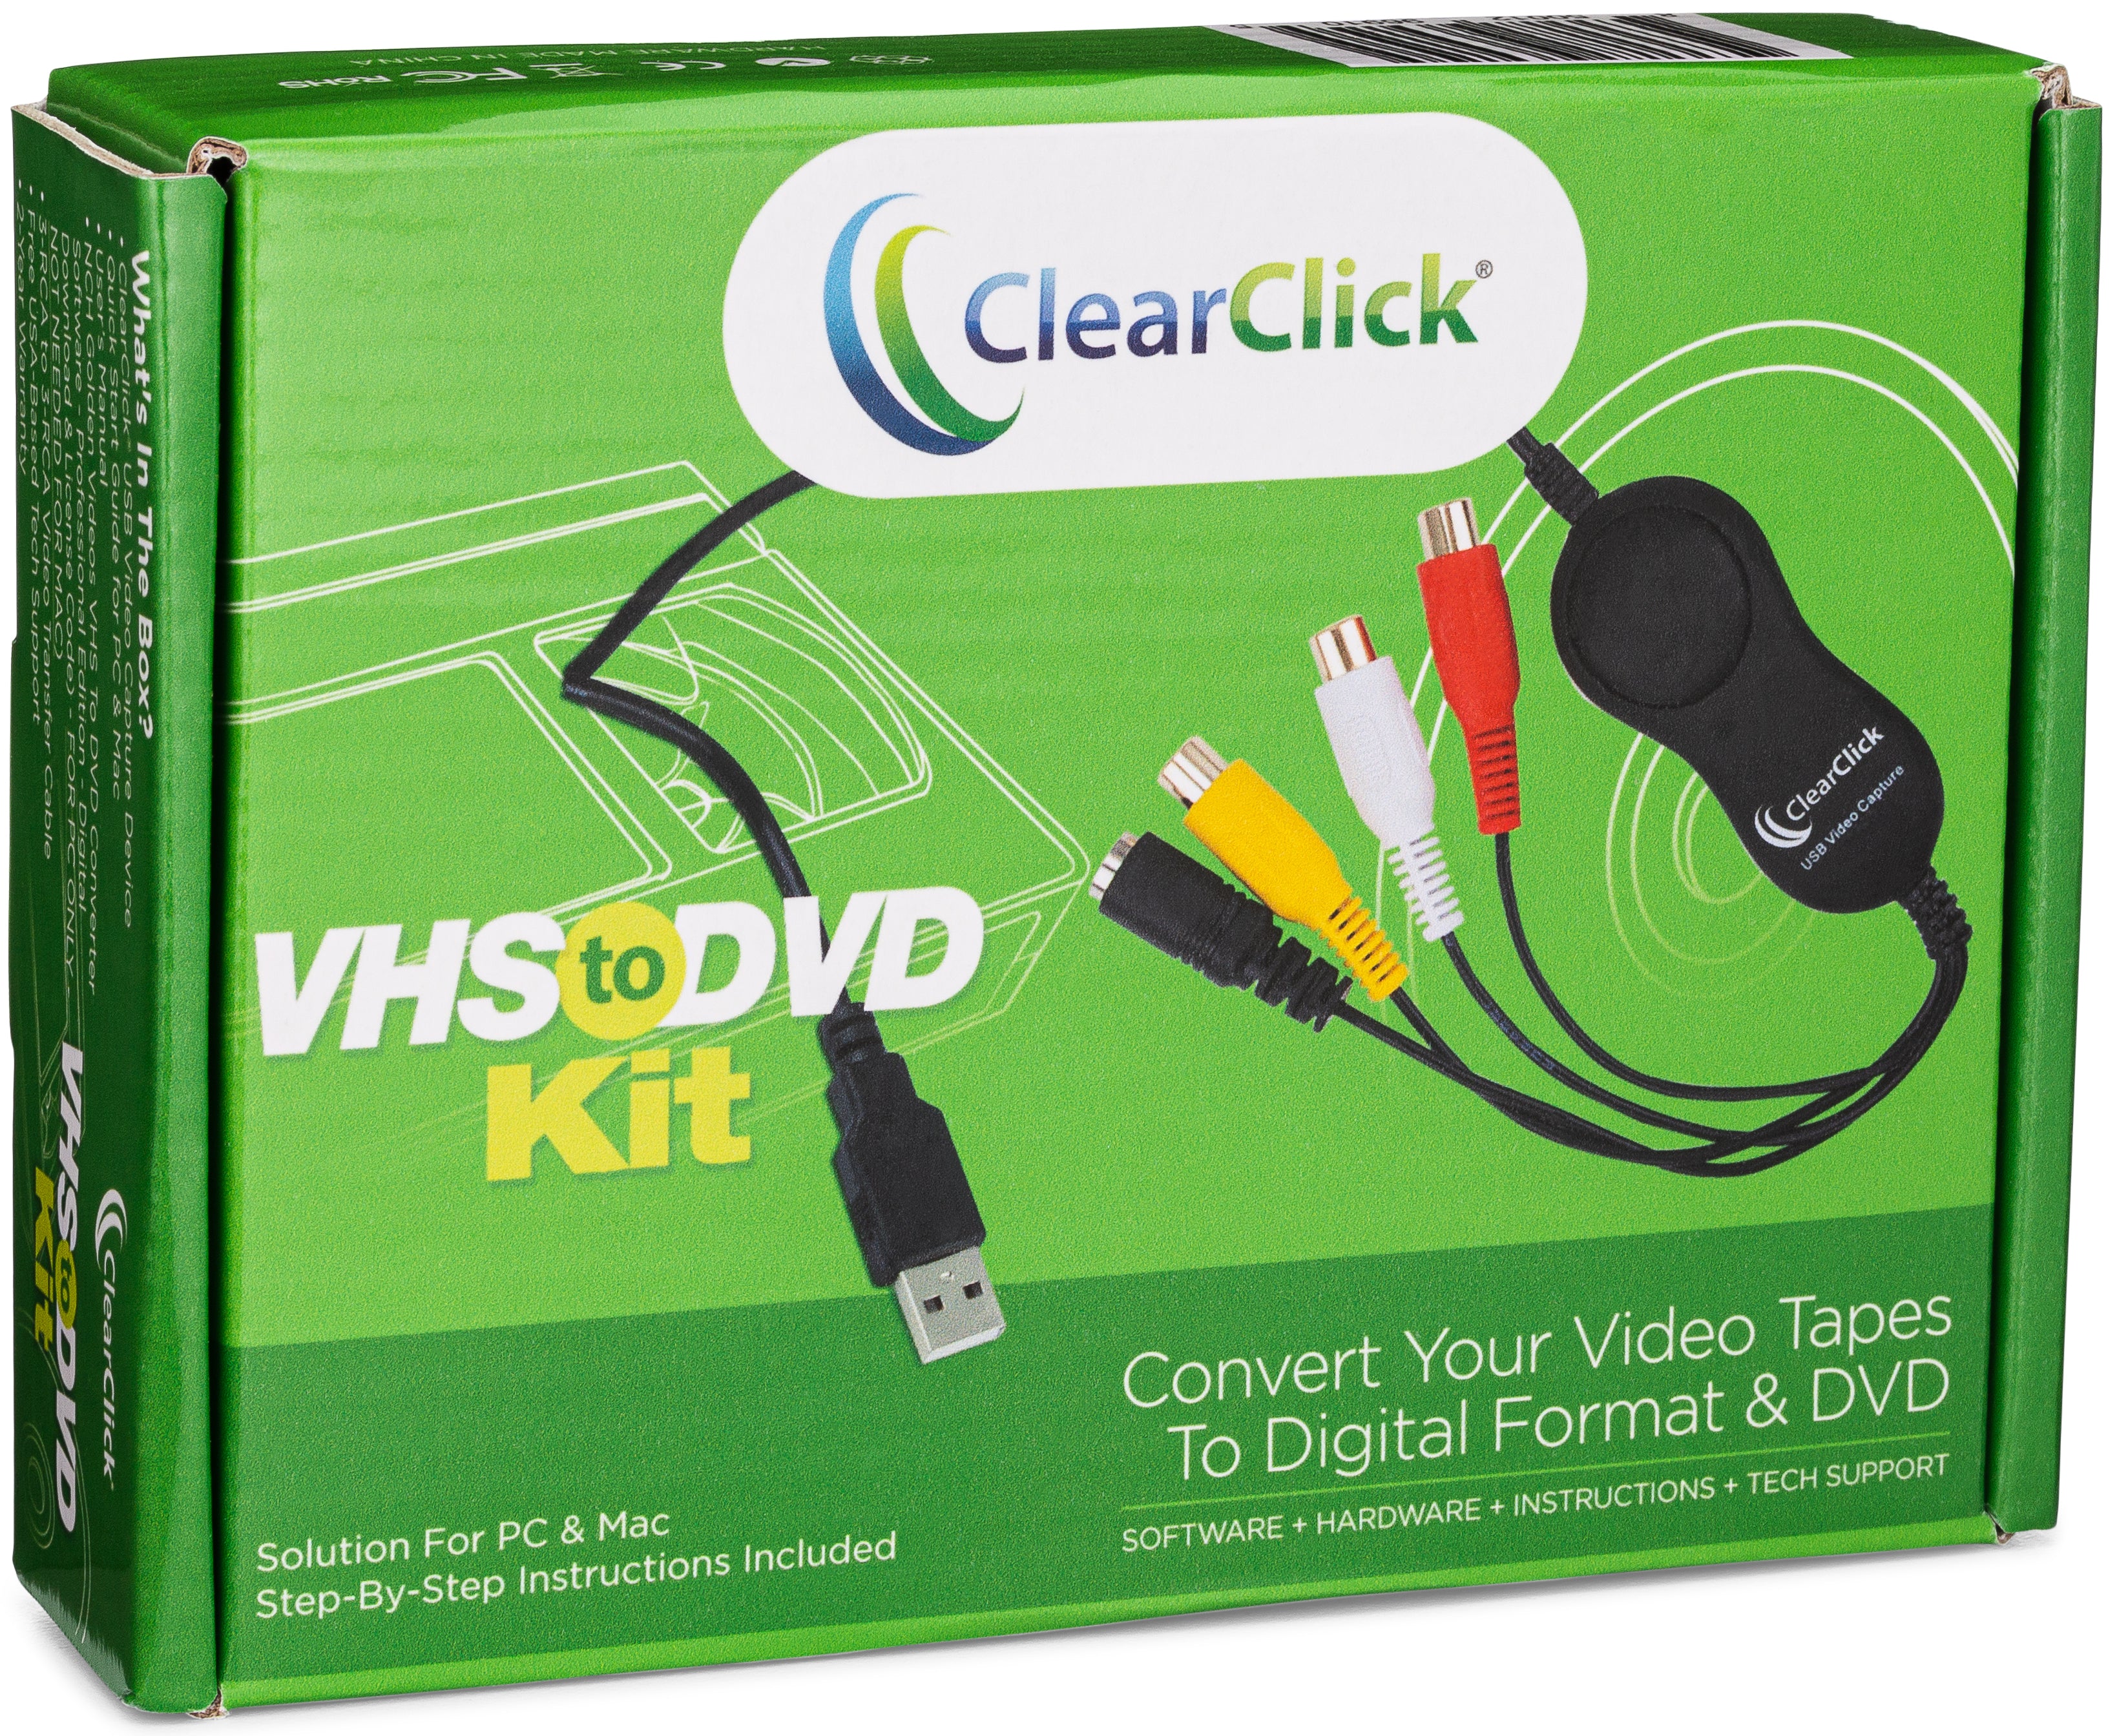 vcr to dvd converter for mac